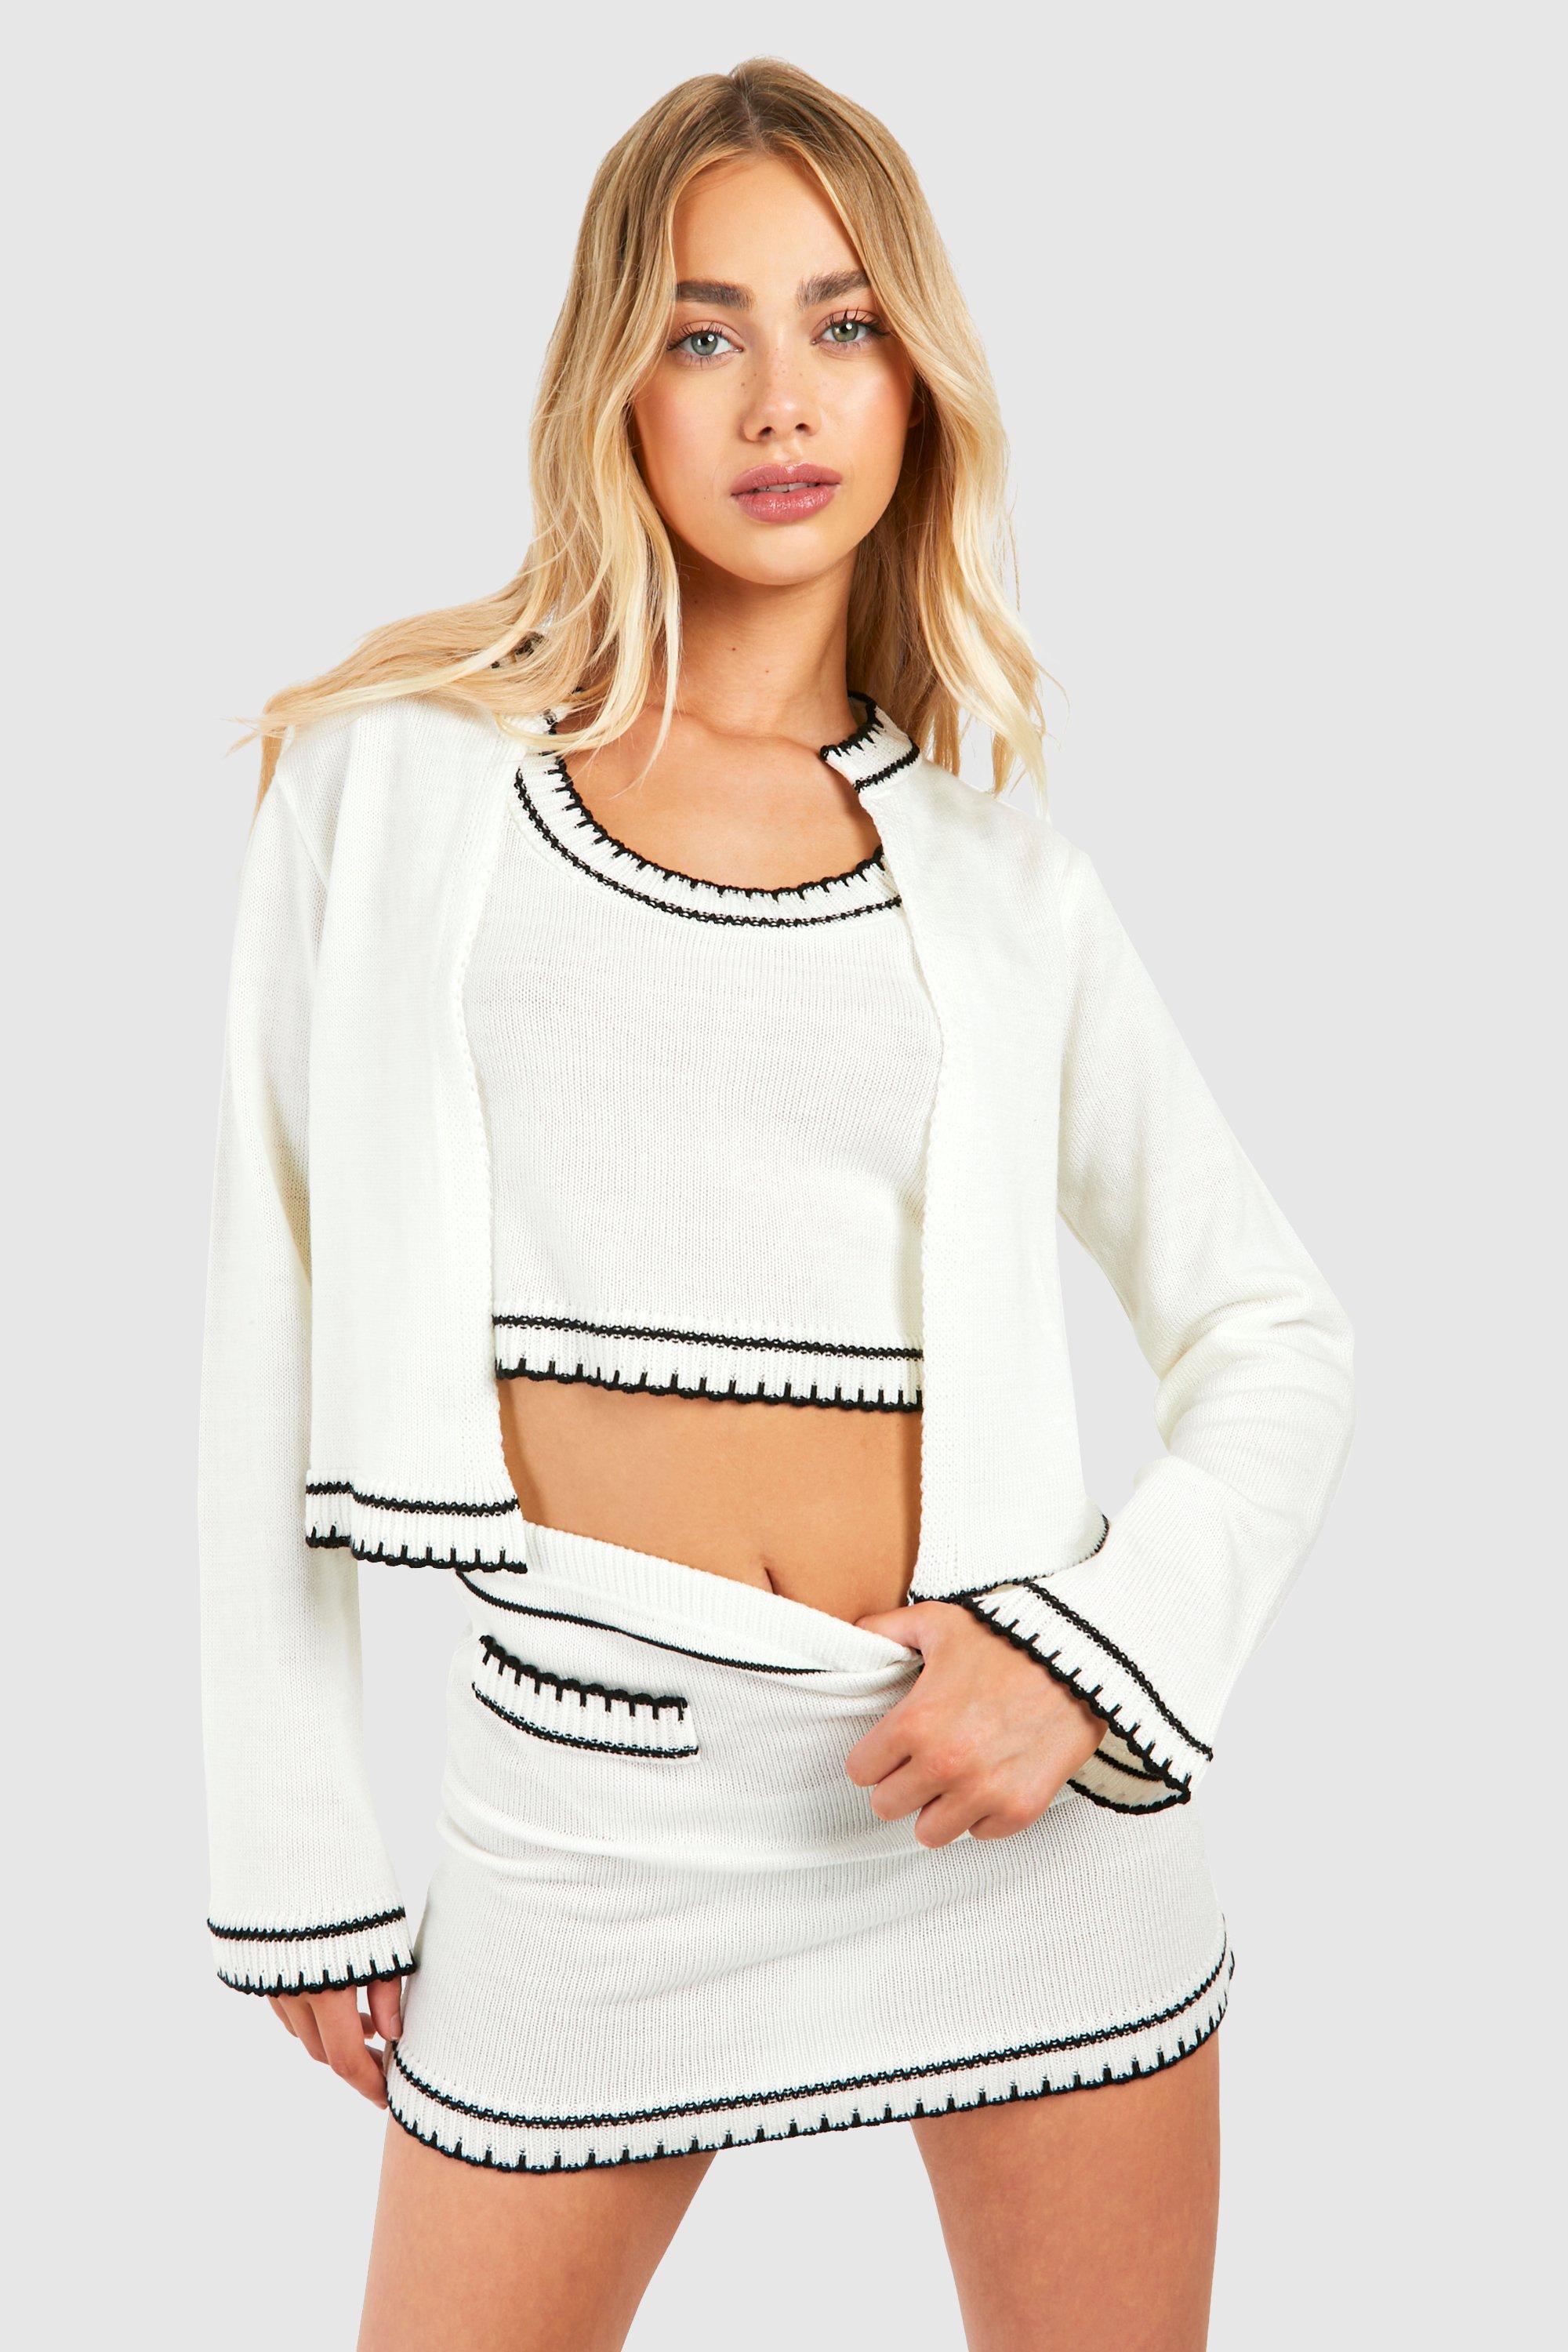 Image of Contrast Stitch 3 Piece Knitted Cardigan, Crop Top And Mini Skirt Set, Cream